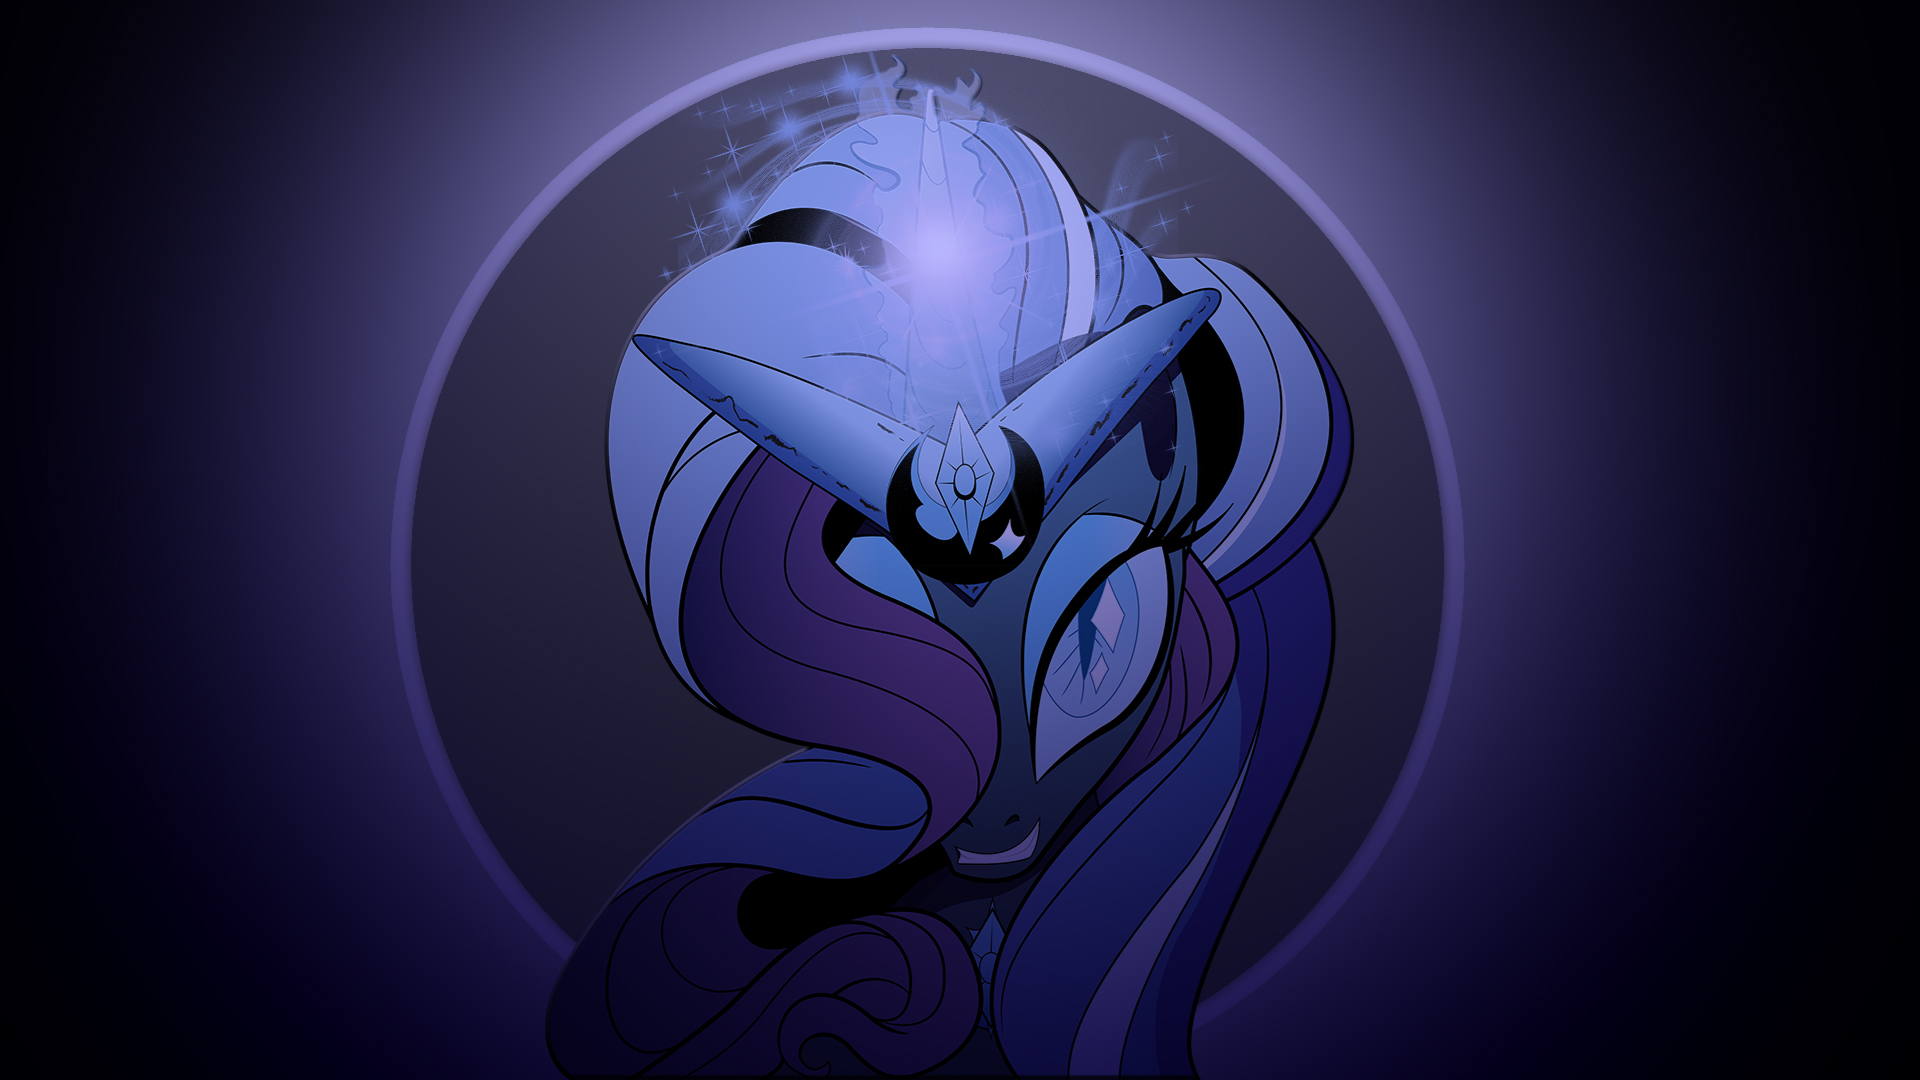 Wallpaper Nightmare Rarity by Barrfind and ReFro82